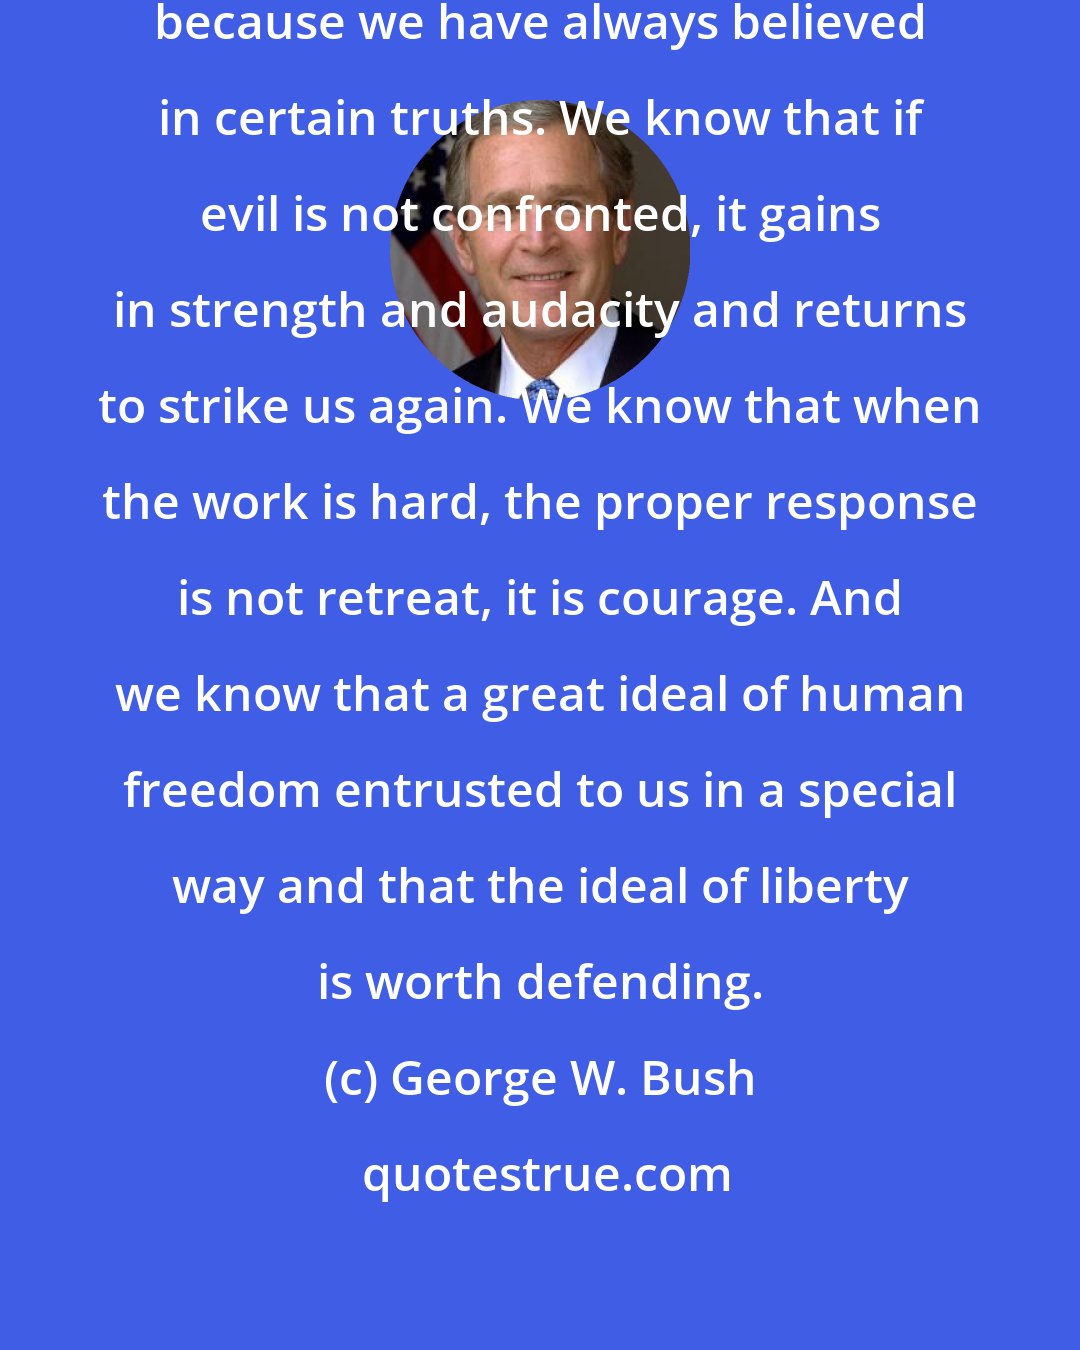 George W. Bush: Americans have always held firm, because we have always believed in certain truths. We know that if evil is not confronted, it gains in strength and audacity and returns to strike us again. We know that when the work is hard, the proper response is not retreat, it is courage. And we know that a great ideal of human freedom entrusted to us in a special way and that the ideal of liberty is worth defending.